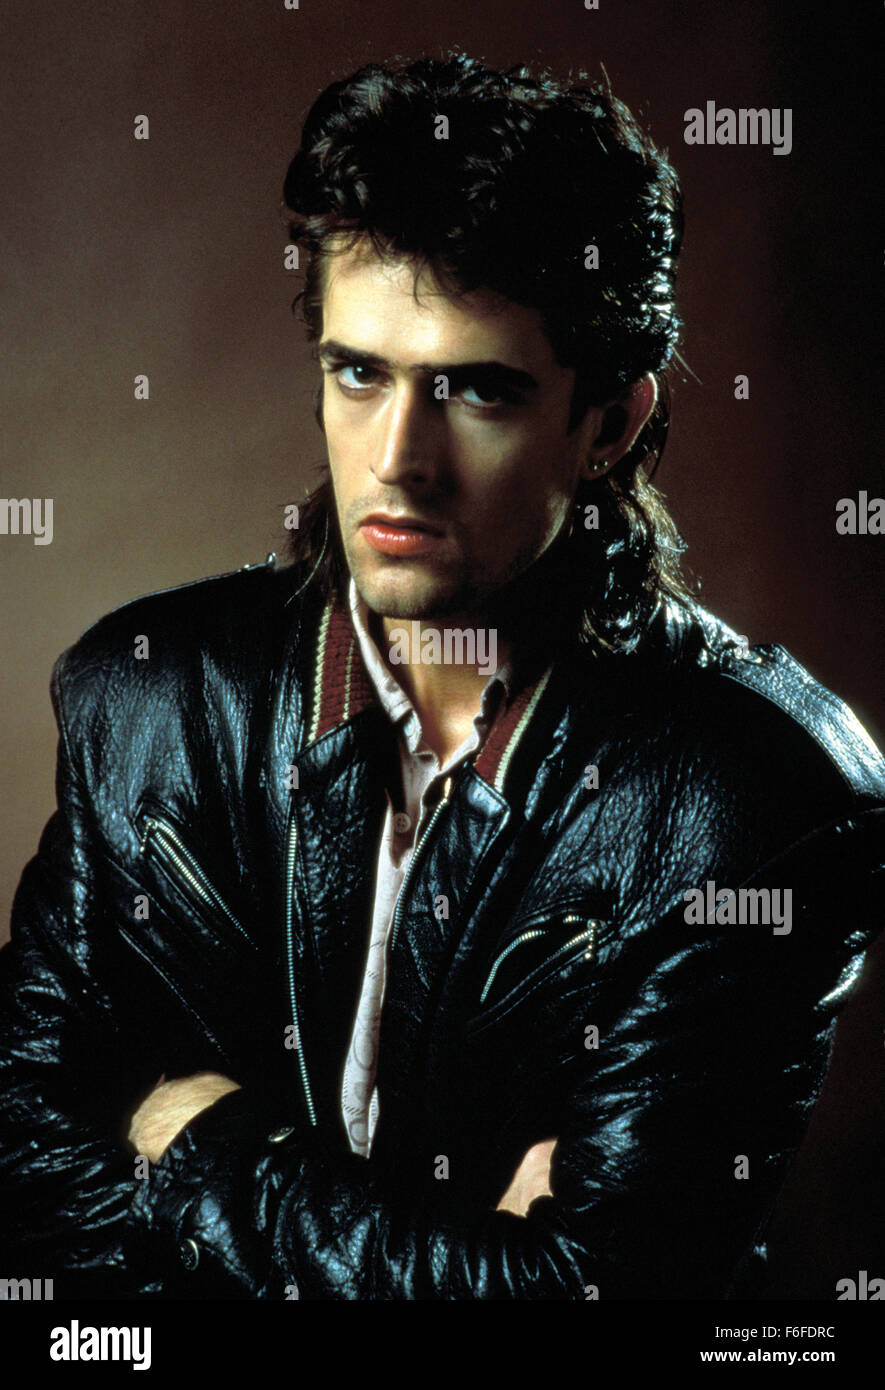 RELEASE DATE: 1987. MOVIE TITLE: Hearts of Fire. STUDIO: Image Entertainment. PICTURED: RUPERT EVERETT as James Colt. Stock Photo